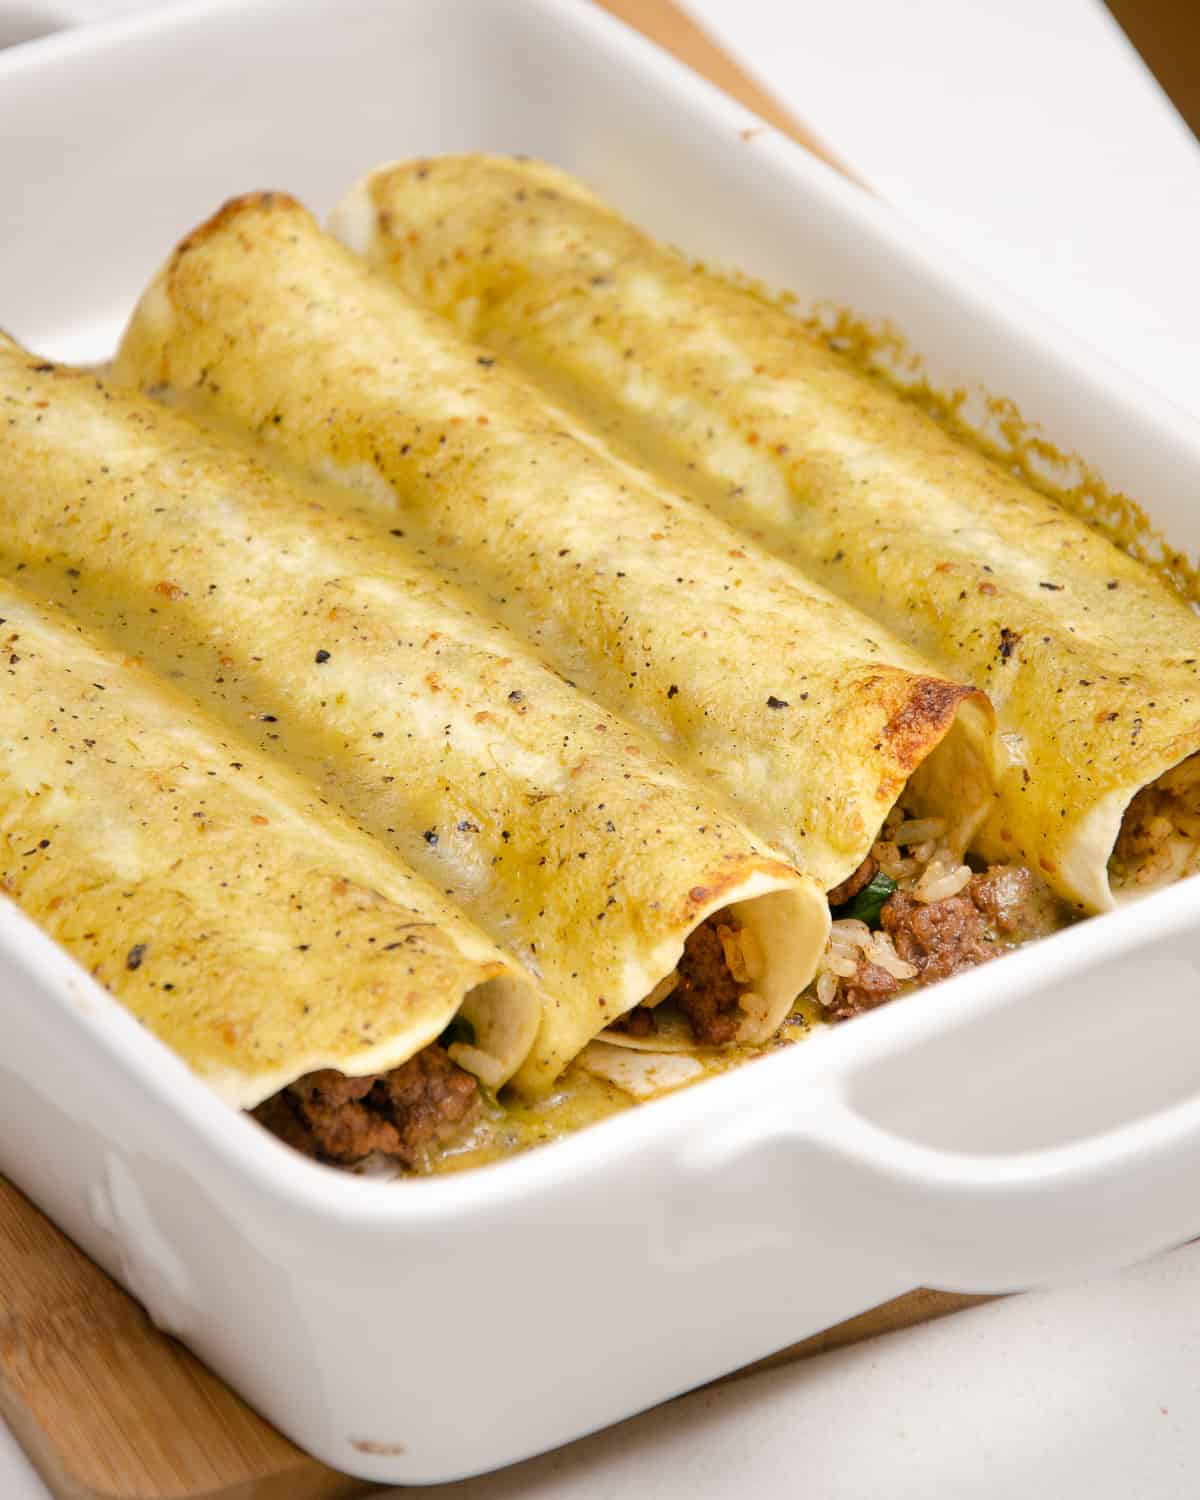 Beef enchiladas with green sauce in a white casserole dish.